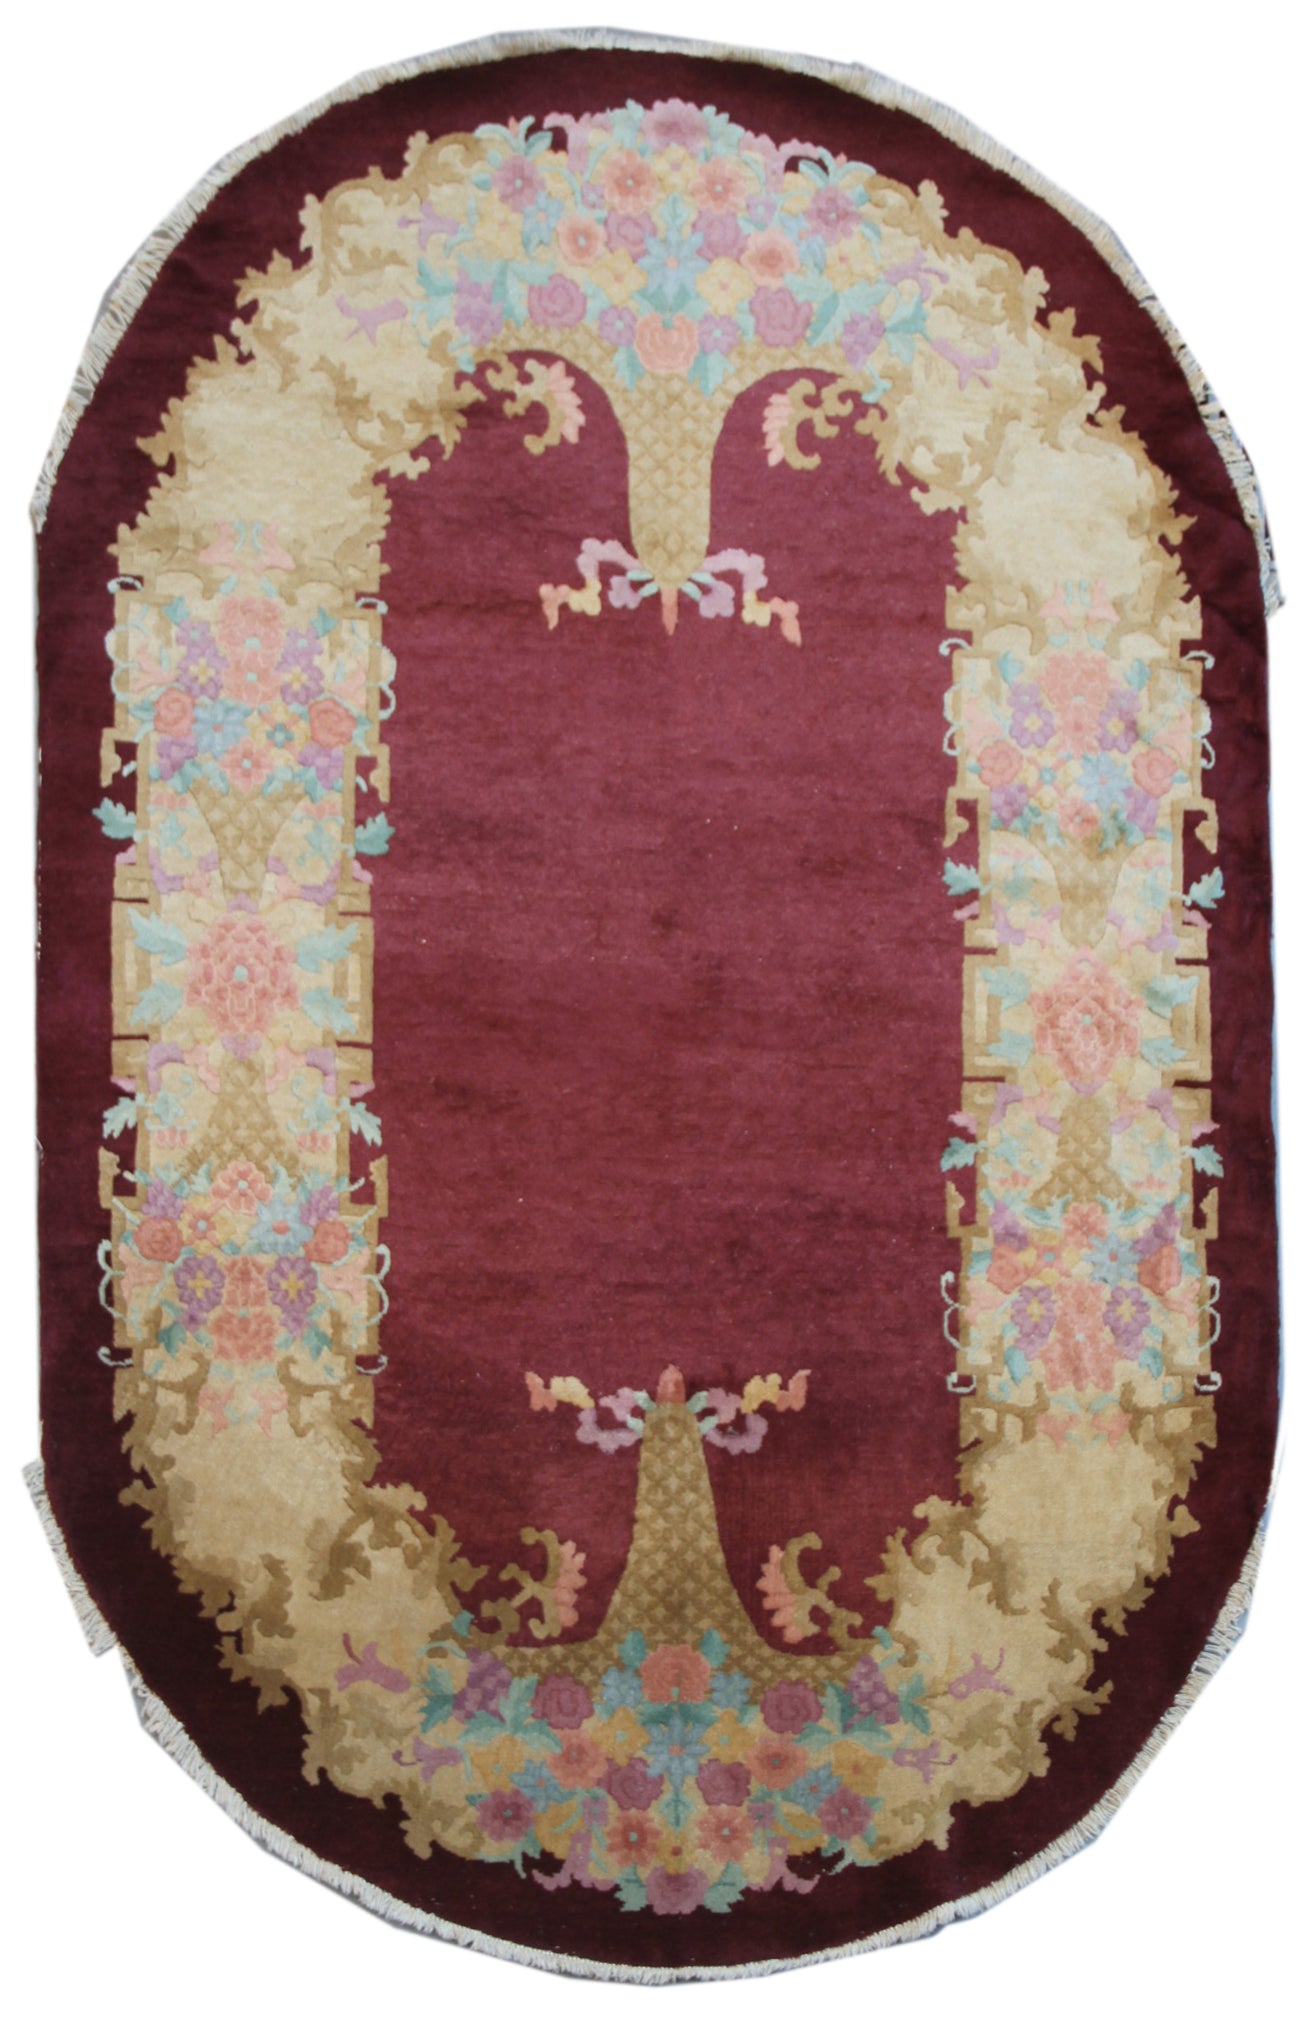 5'x8' Oval Burgundy and Tan Floral Chinese Art Deco Rug